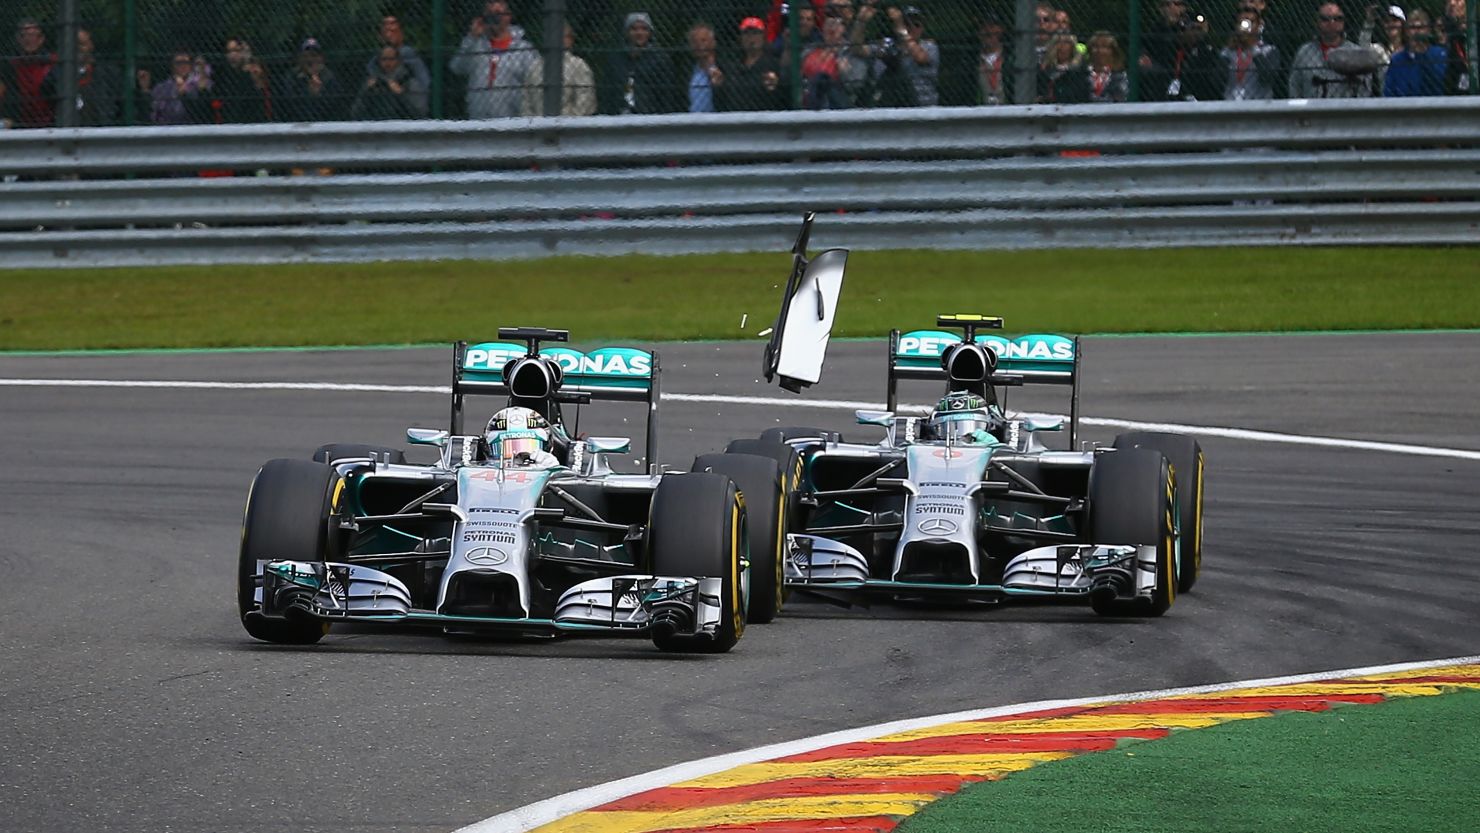 Nico Rosberg's clash with Lewis Hamilton at the Belgium Grand Prix was the latest spat between the Mercedes title rivals.